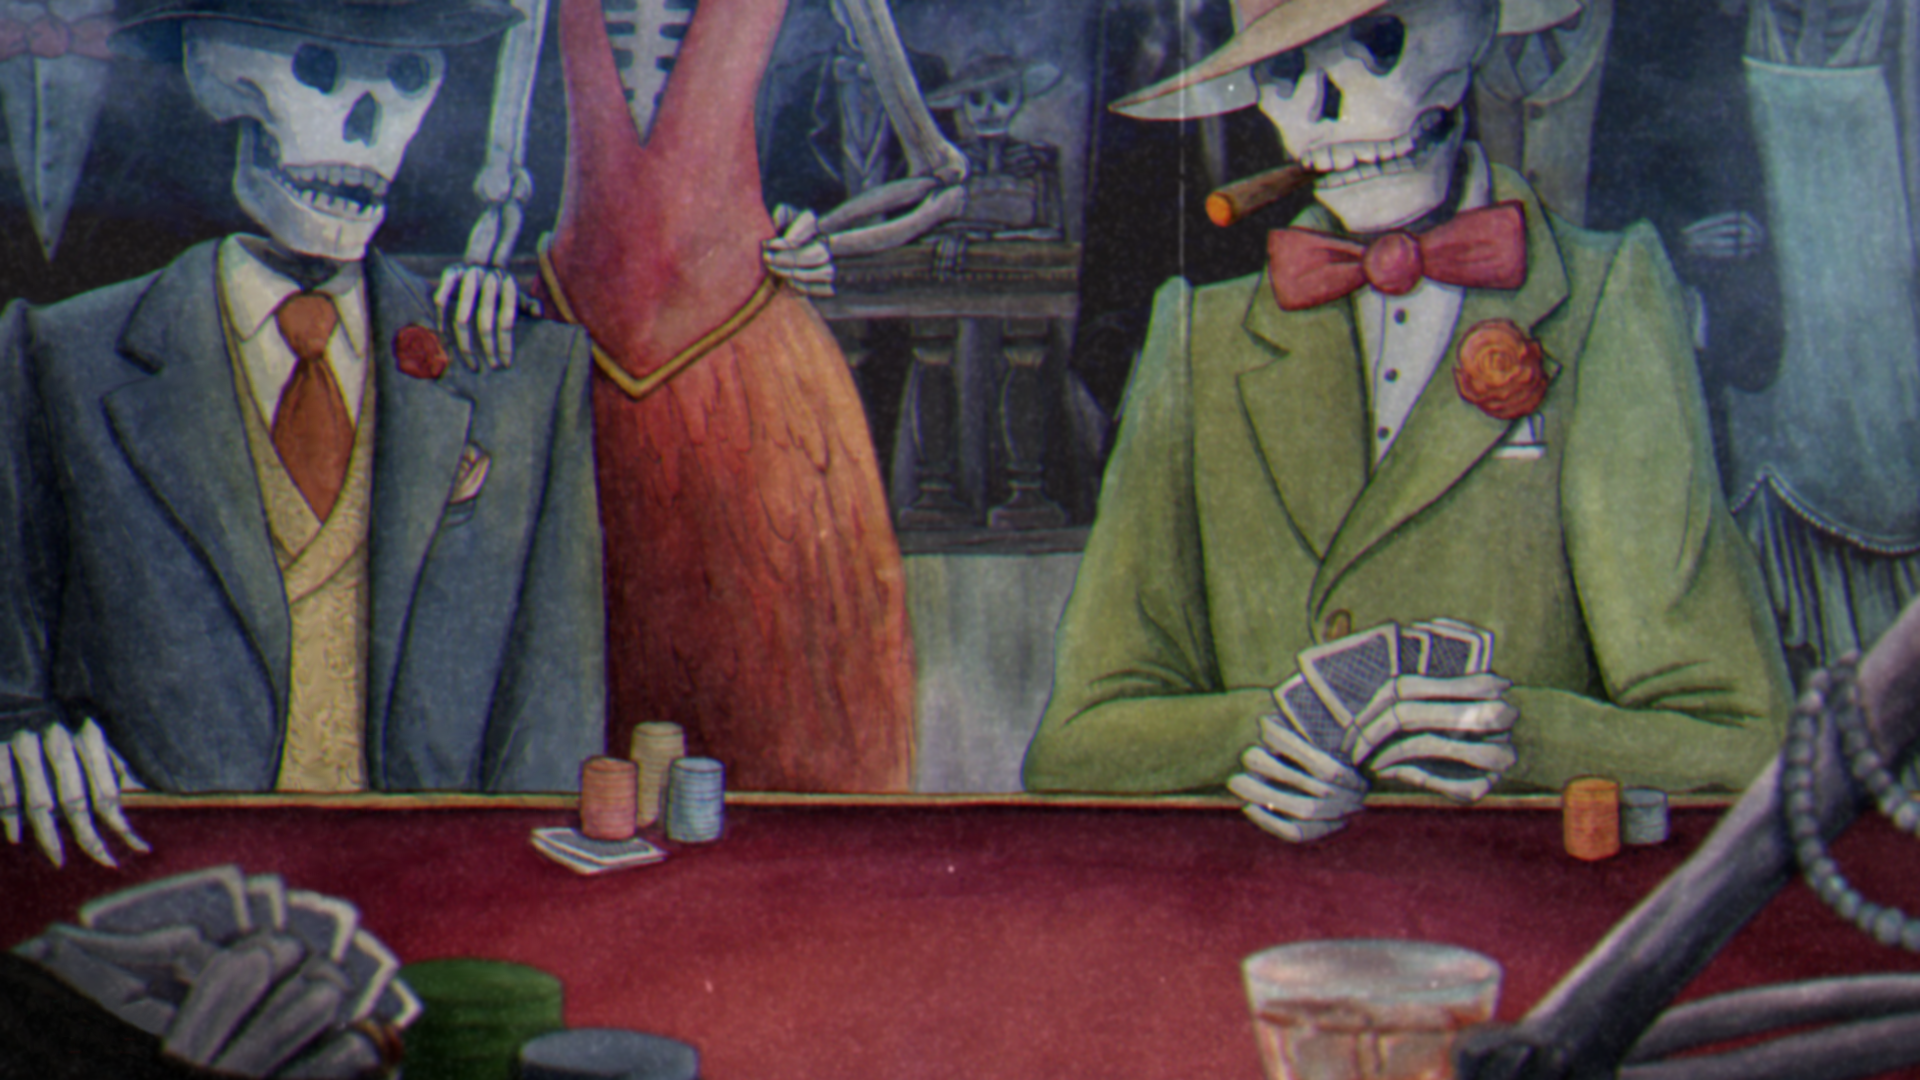 Skeletons playing cards